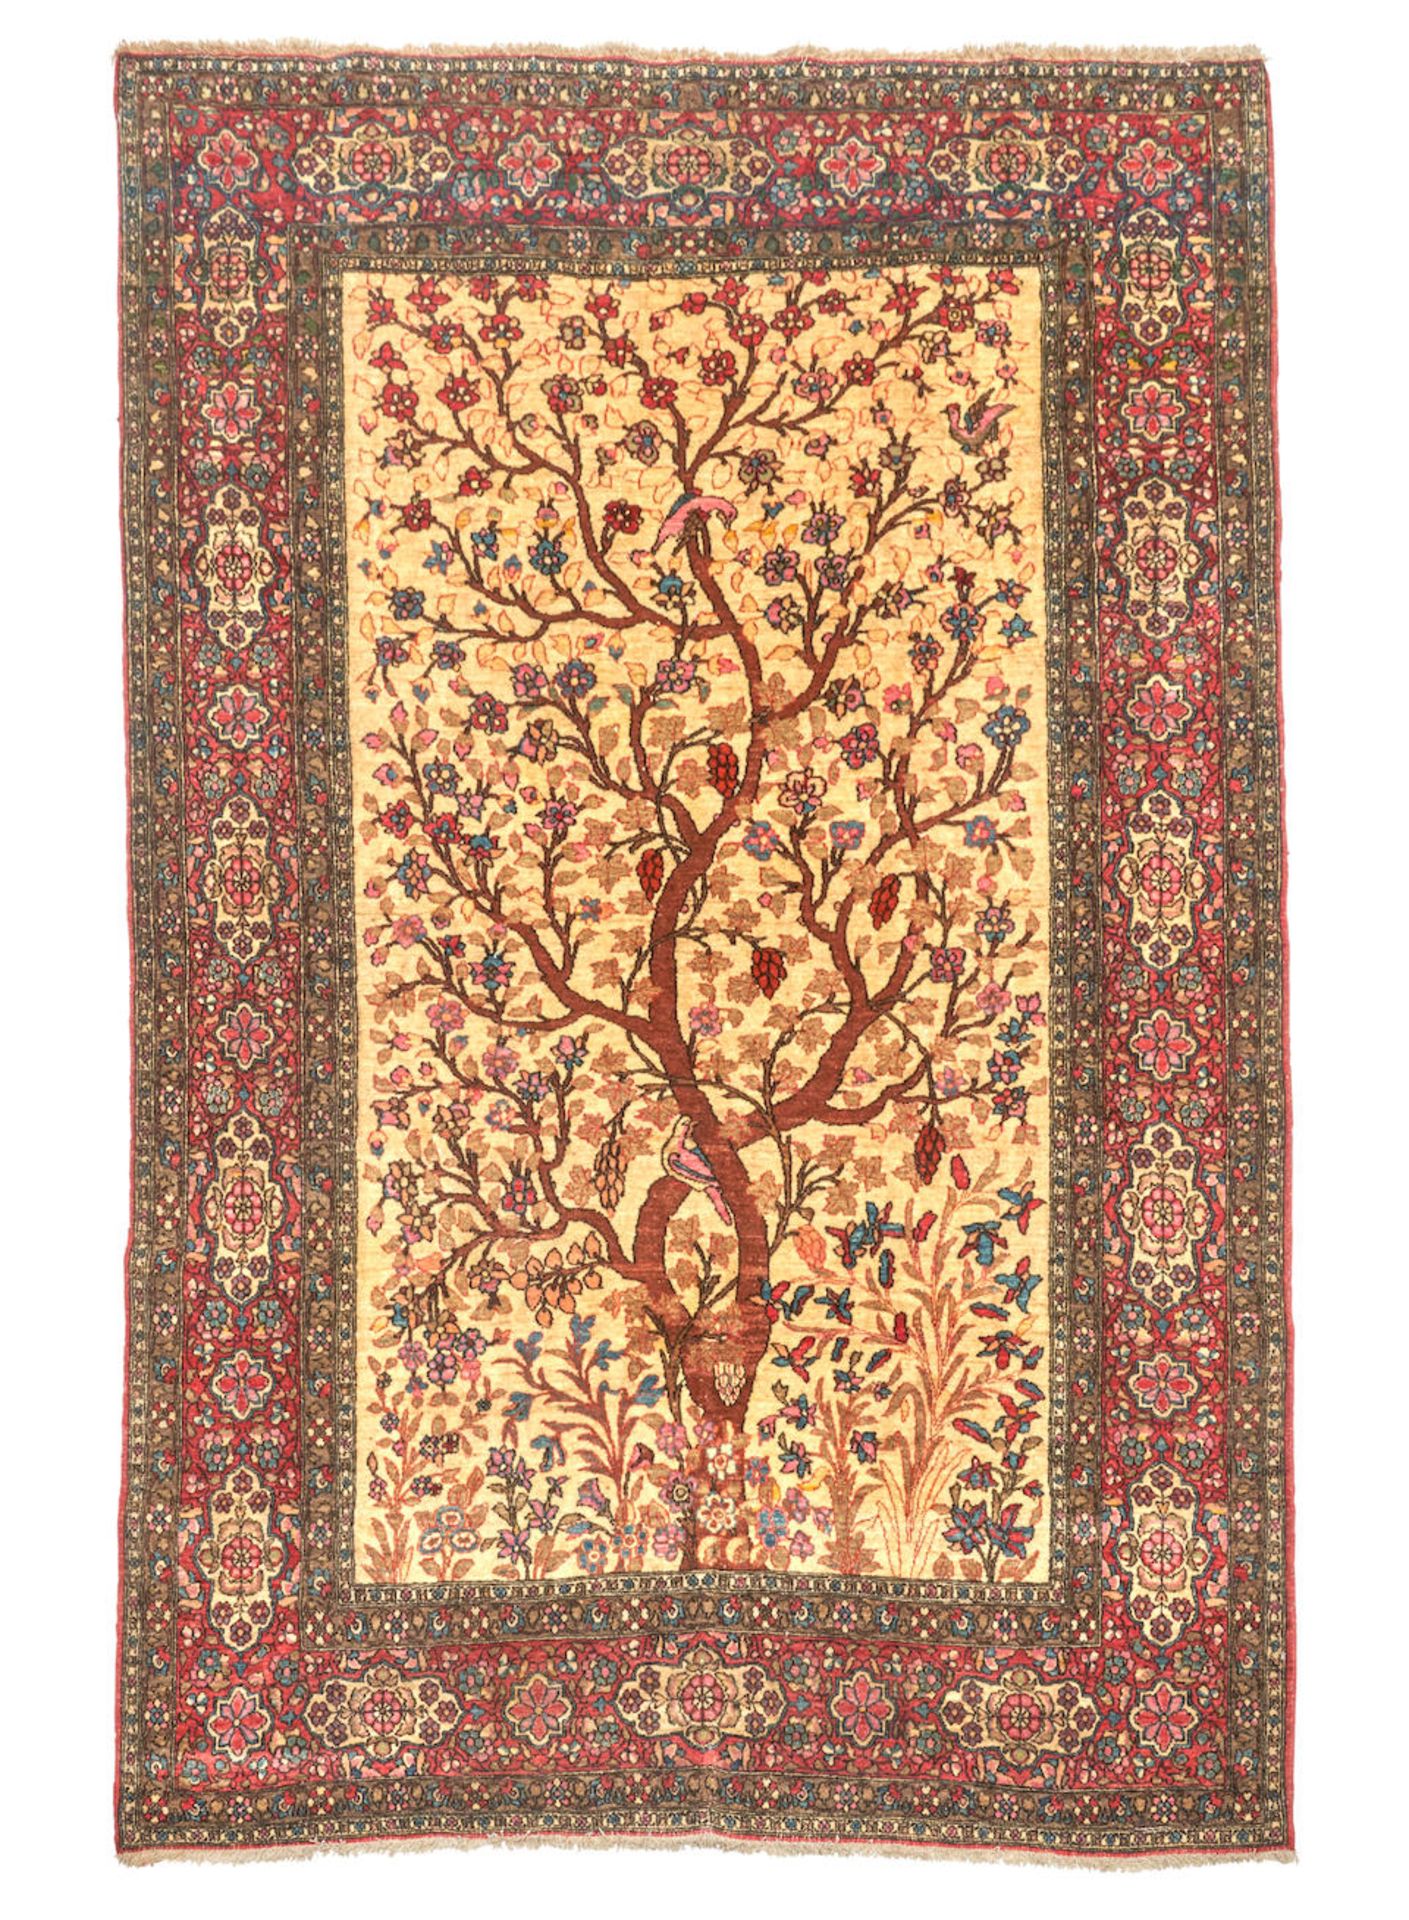 Isphahan Rug Iran 4 ft. 5 in. x 6 ft. 6 in.